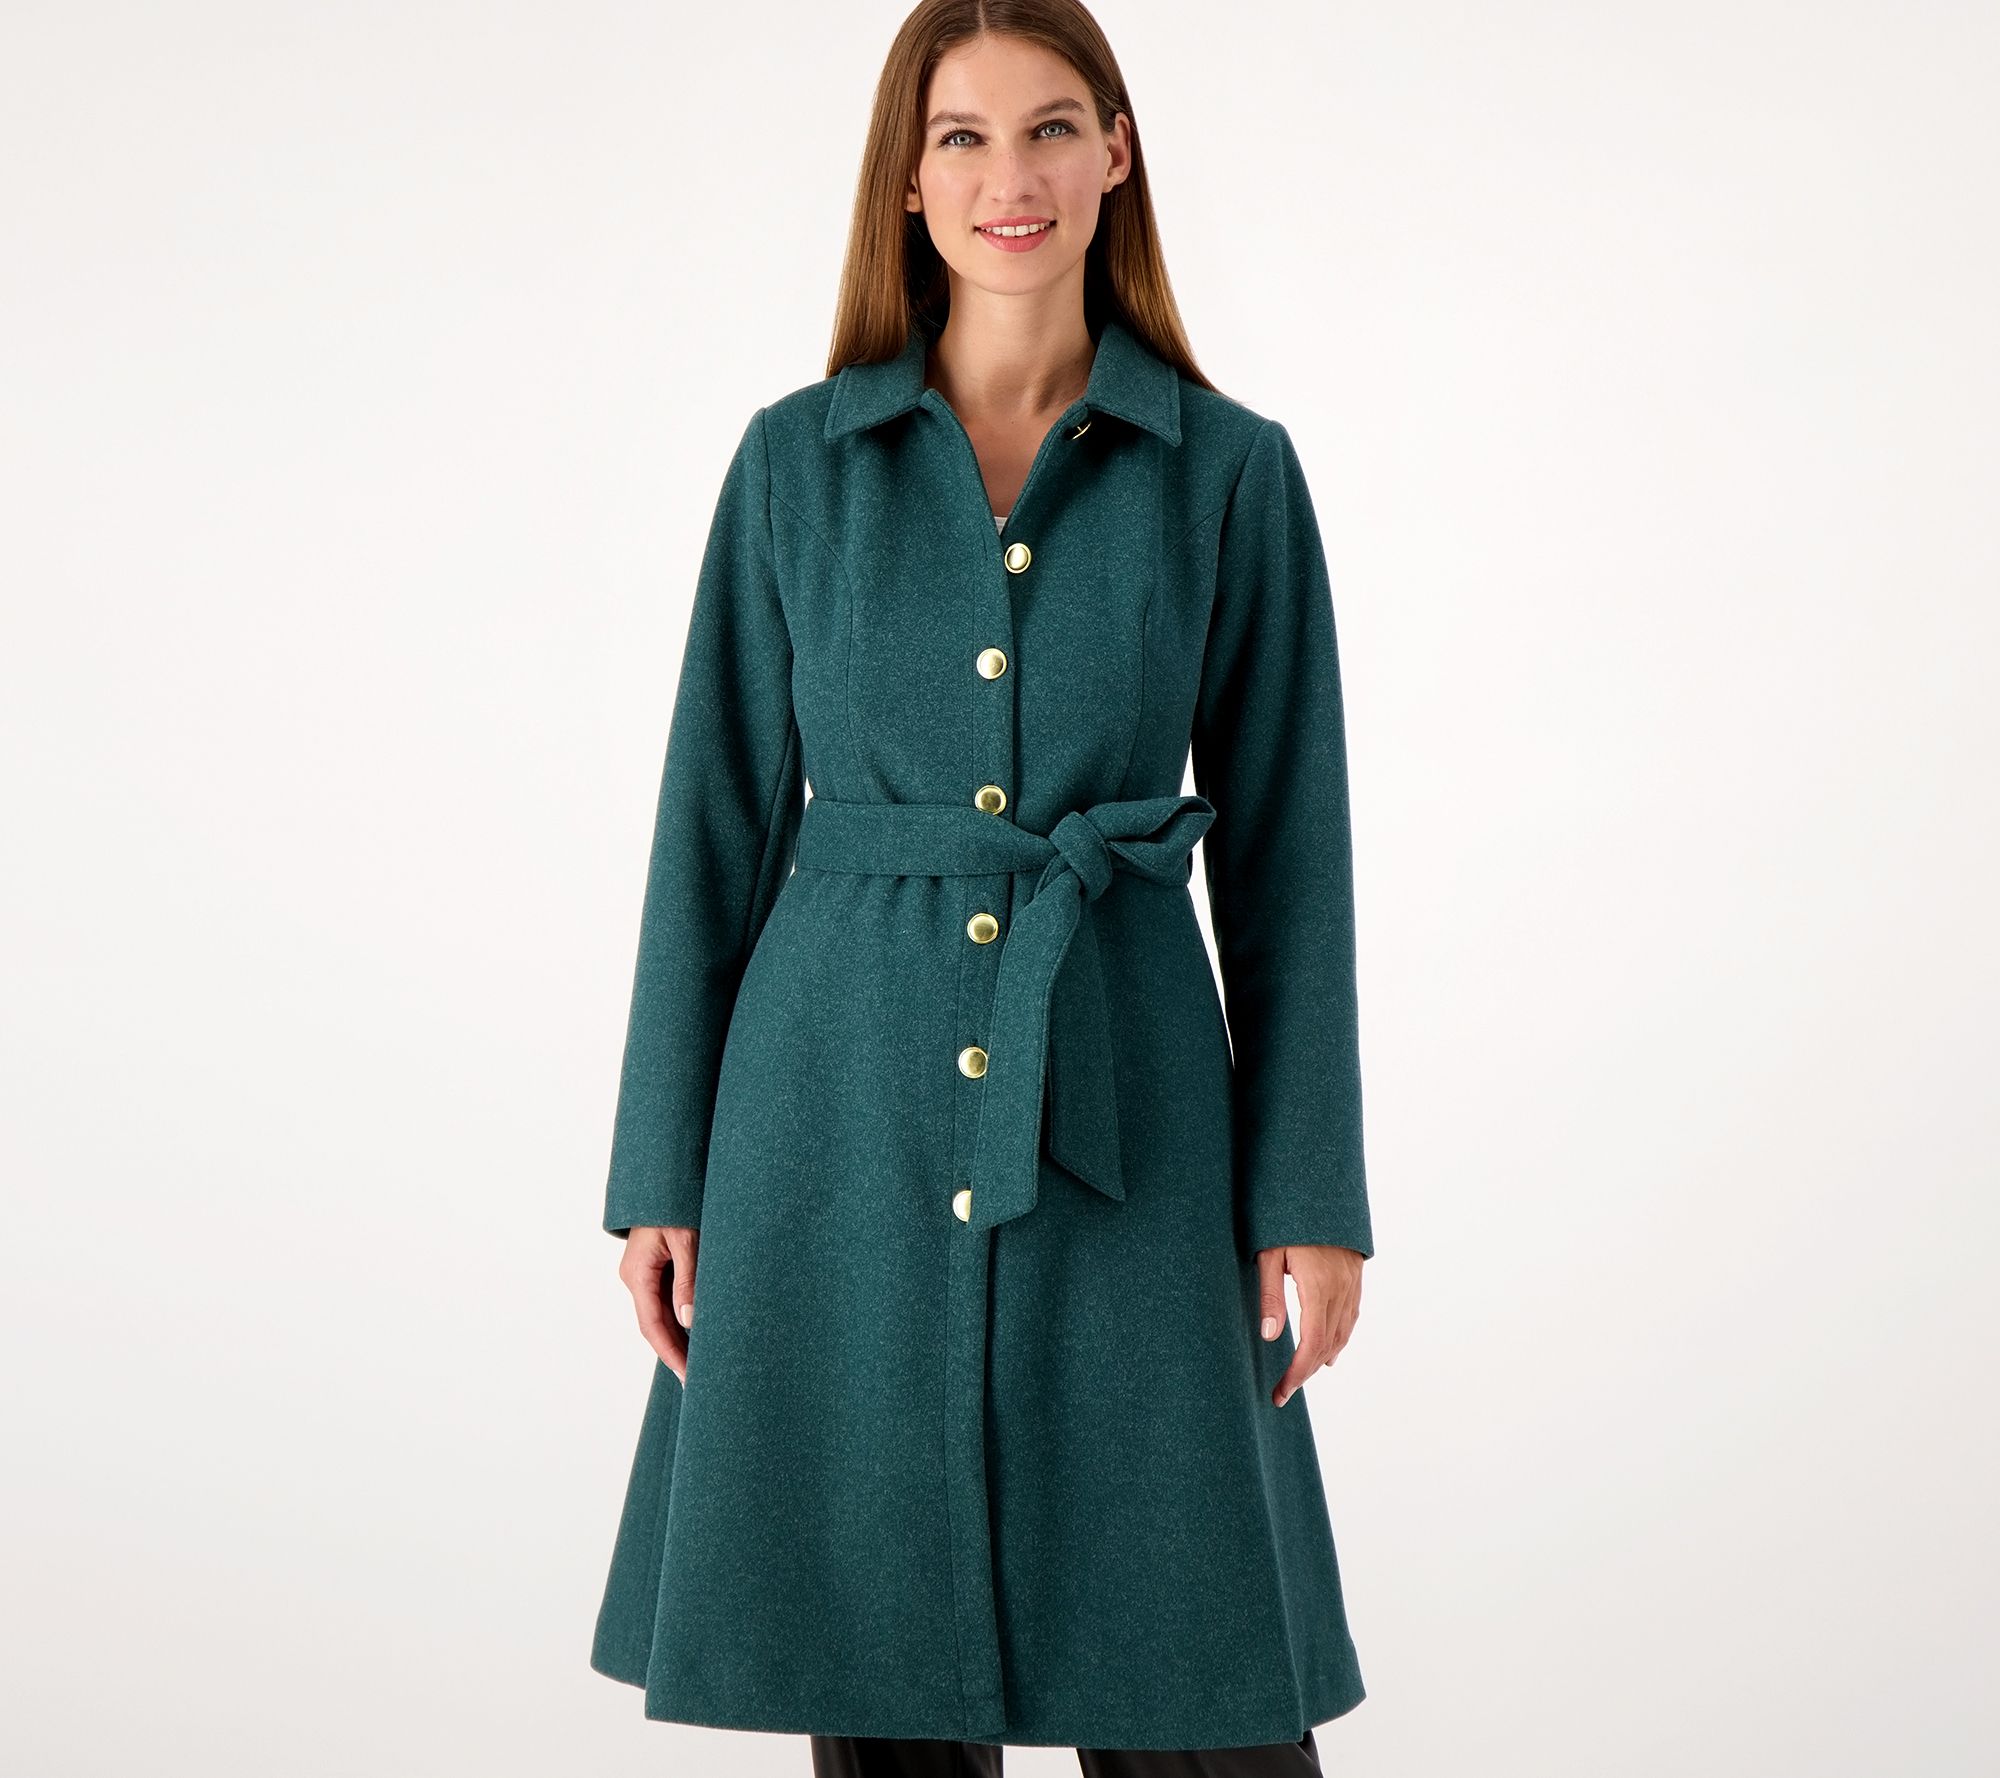 Girl With Curves Classic A-Line Coat - QVC.com